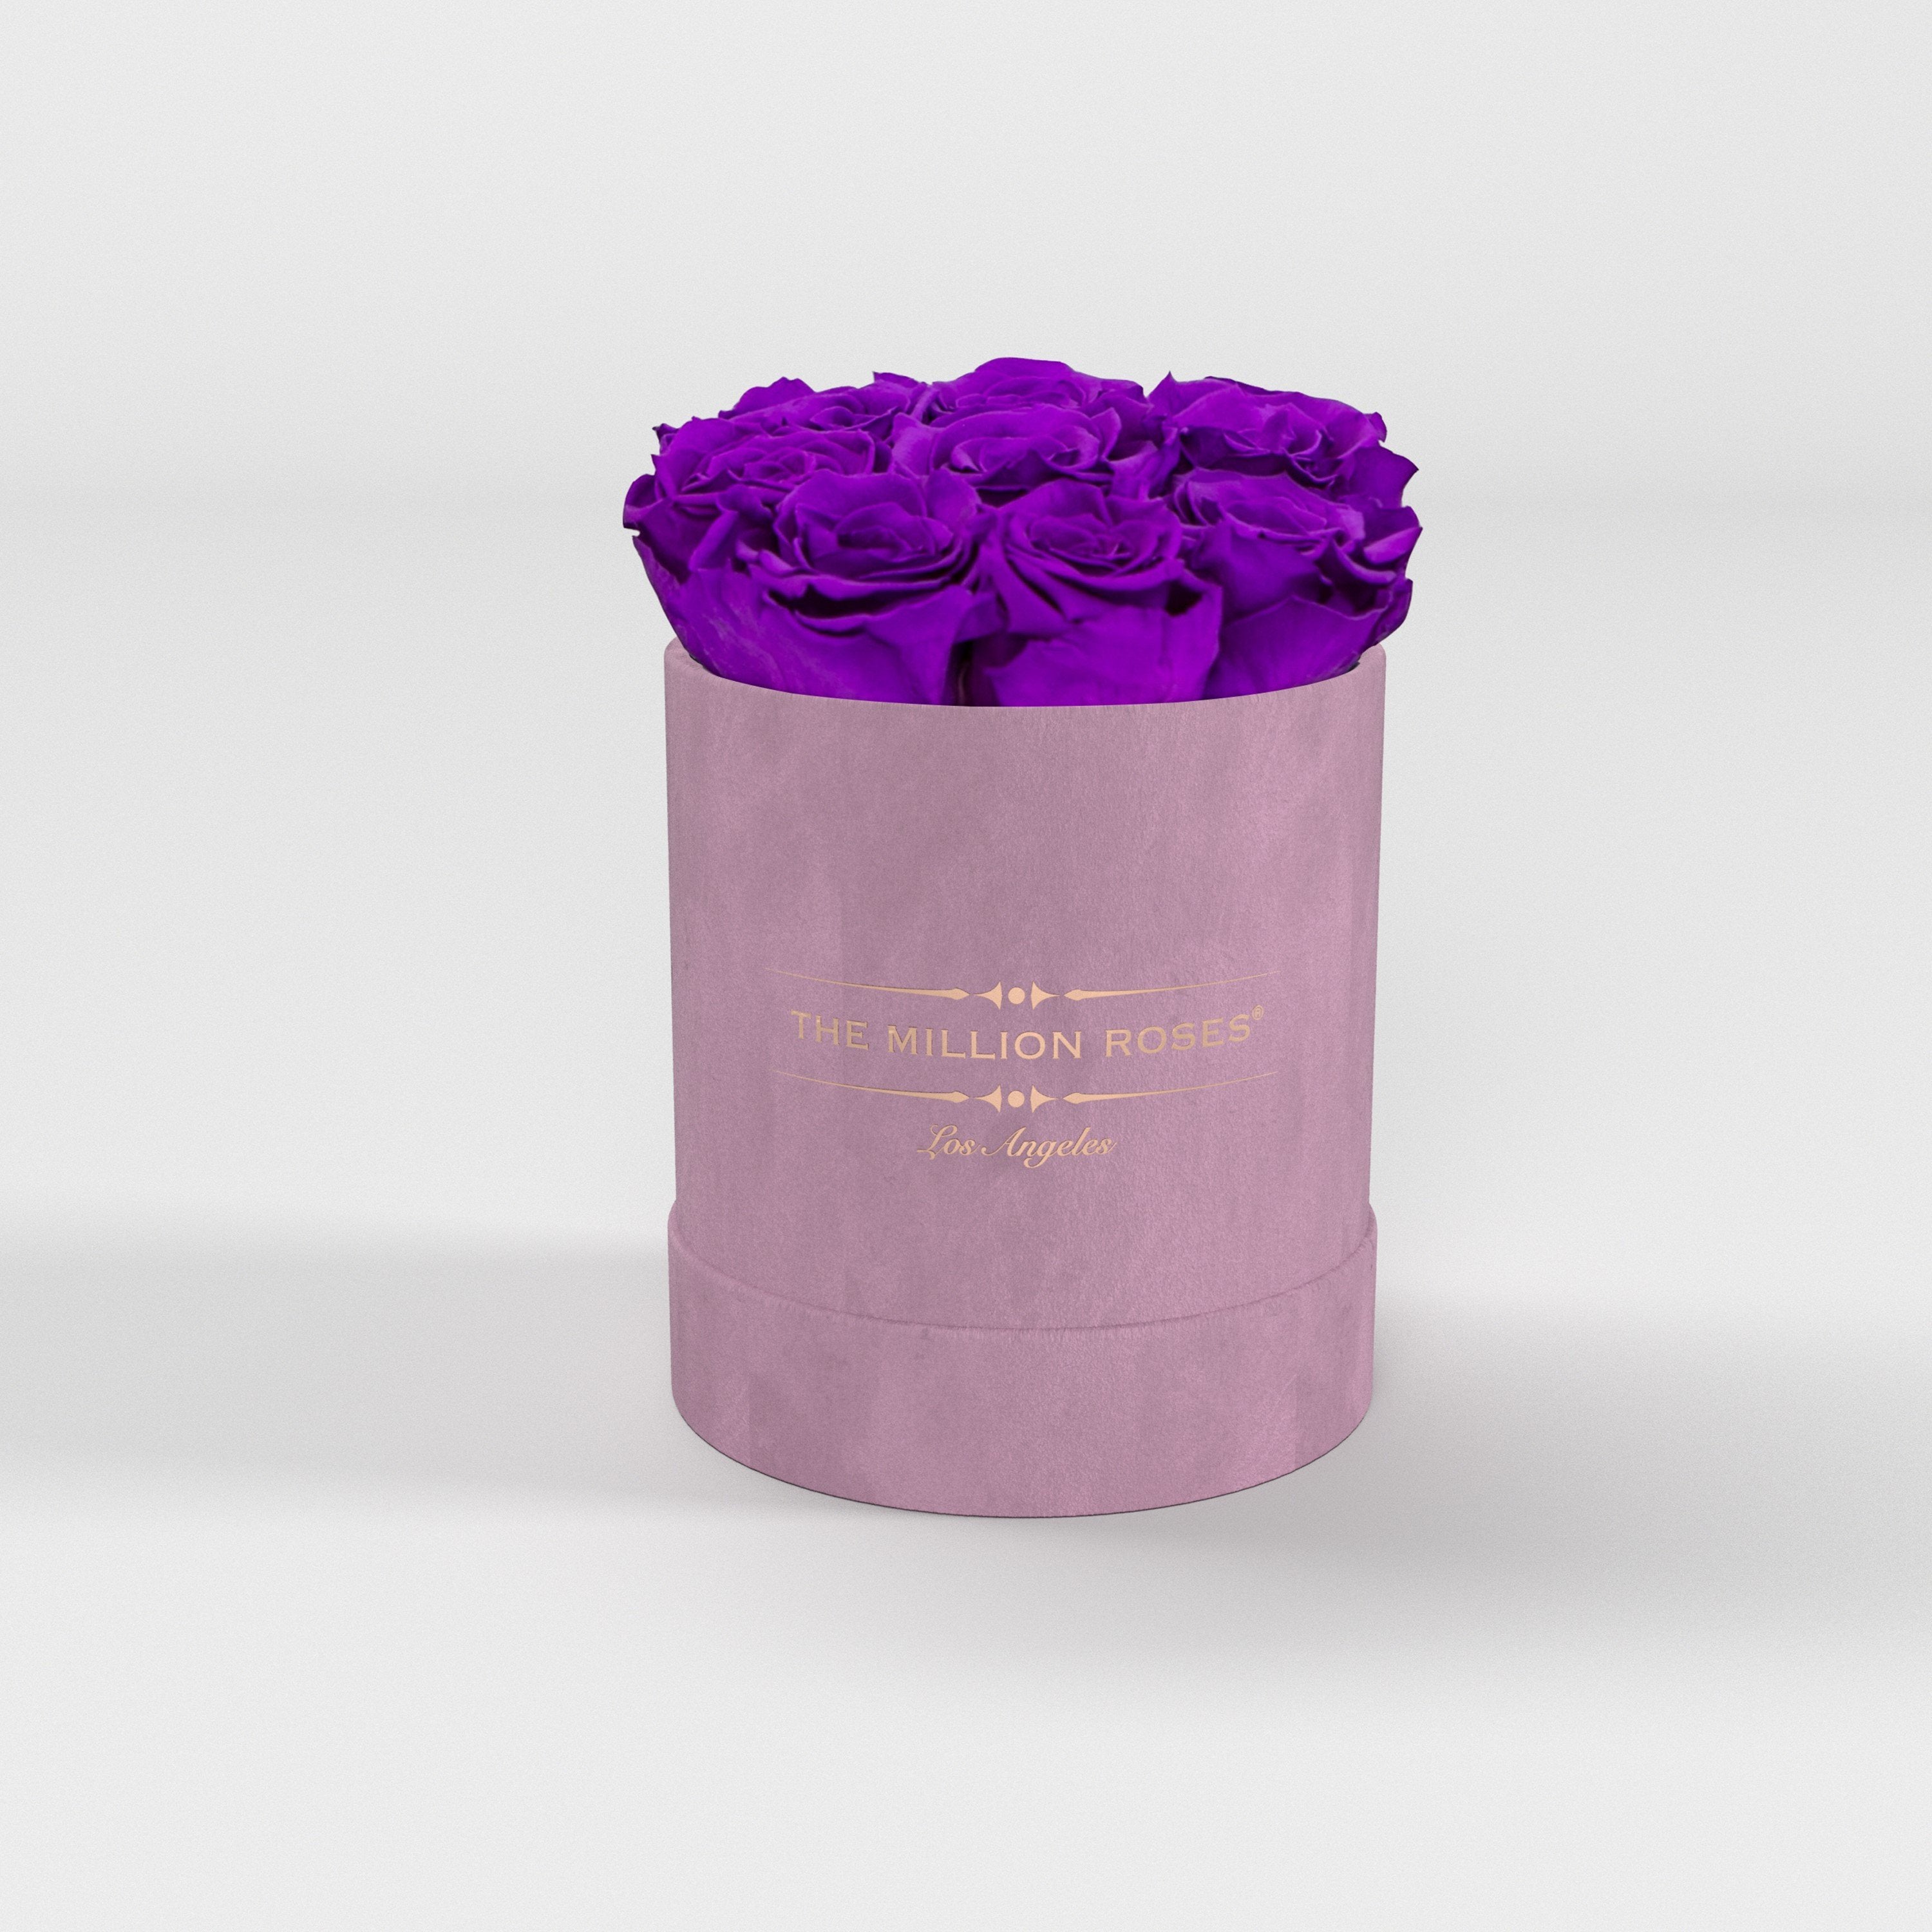 ( LA ) Light Pink - Suede - Basic Box with Bright Purple Roses Kit - the million roses